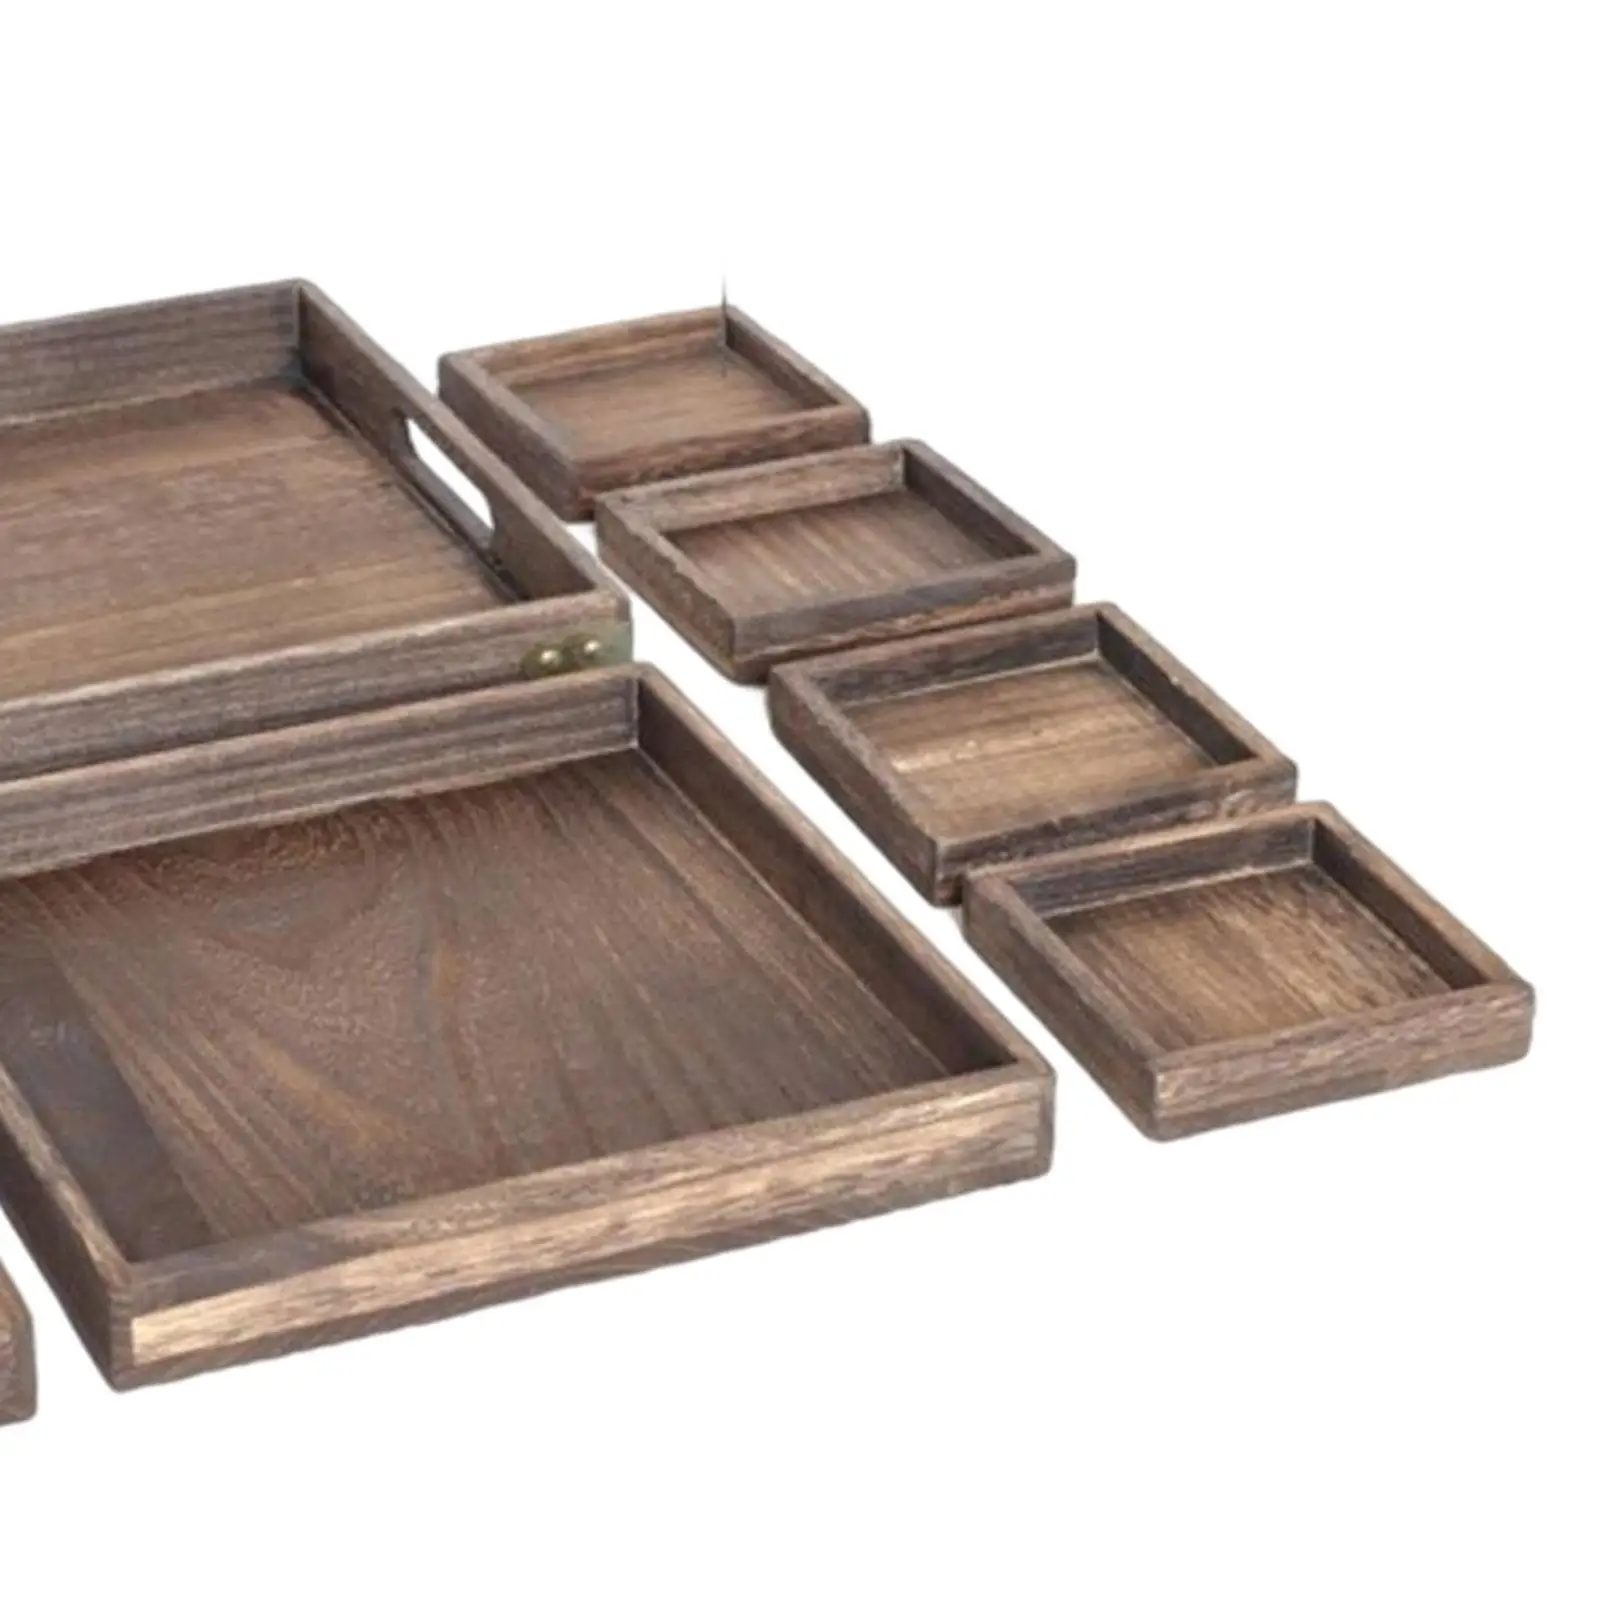 Set of 7 Wooden Serving Trays with Handle Stackable Eating Tray for Living Room, Bathroom or Desk Drawer Durable Versatile